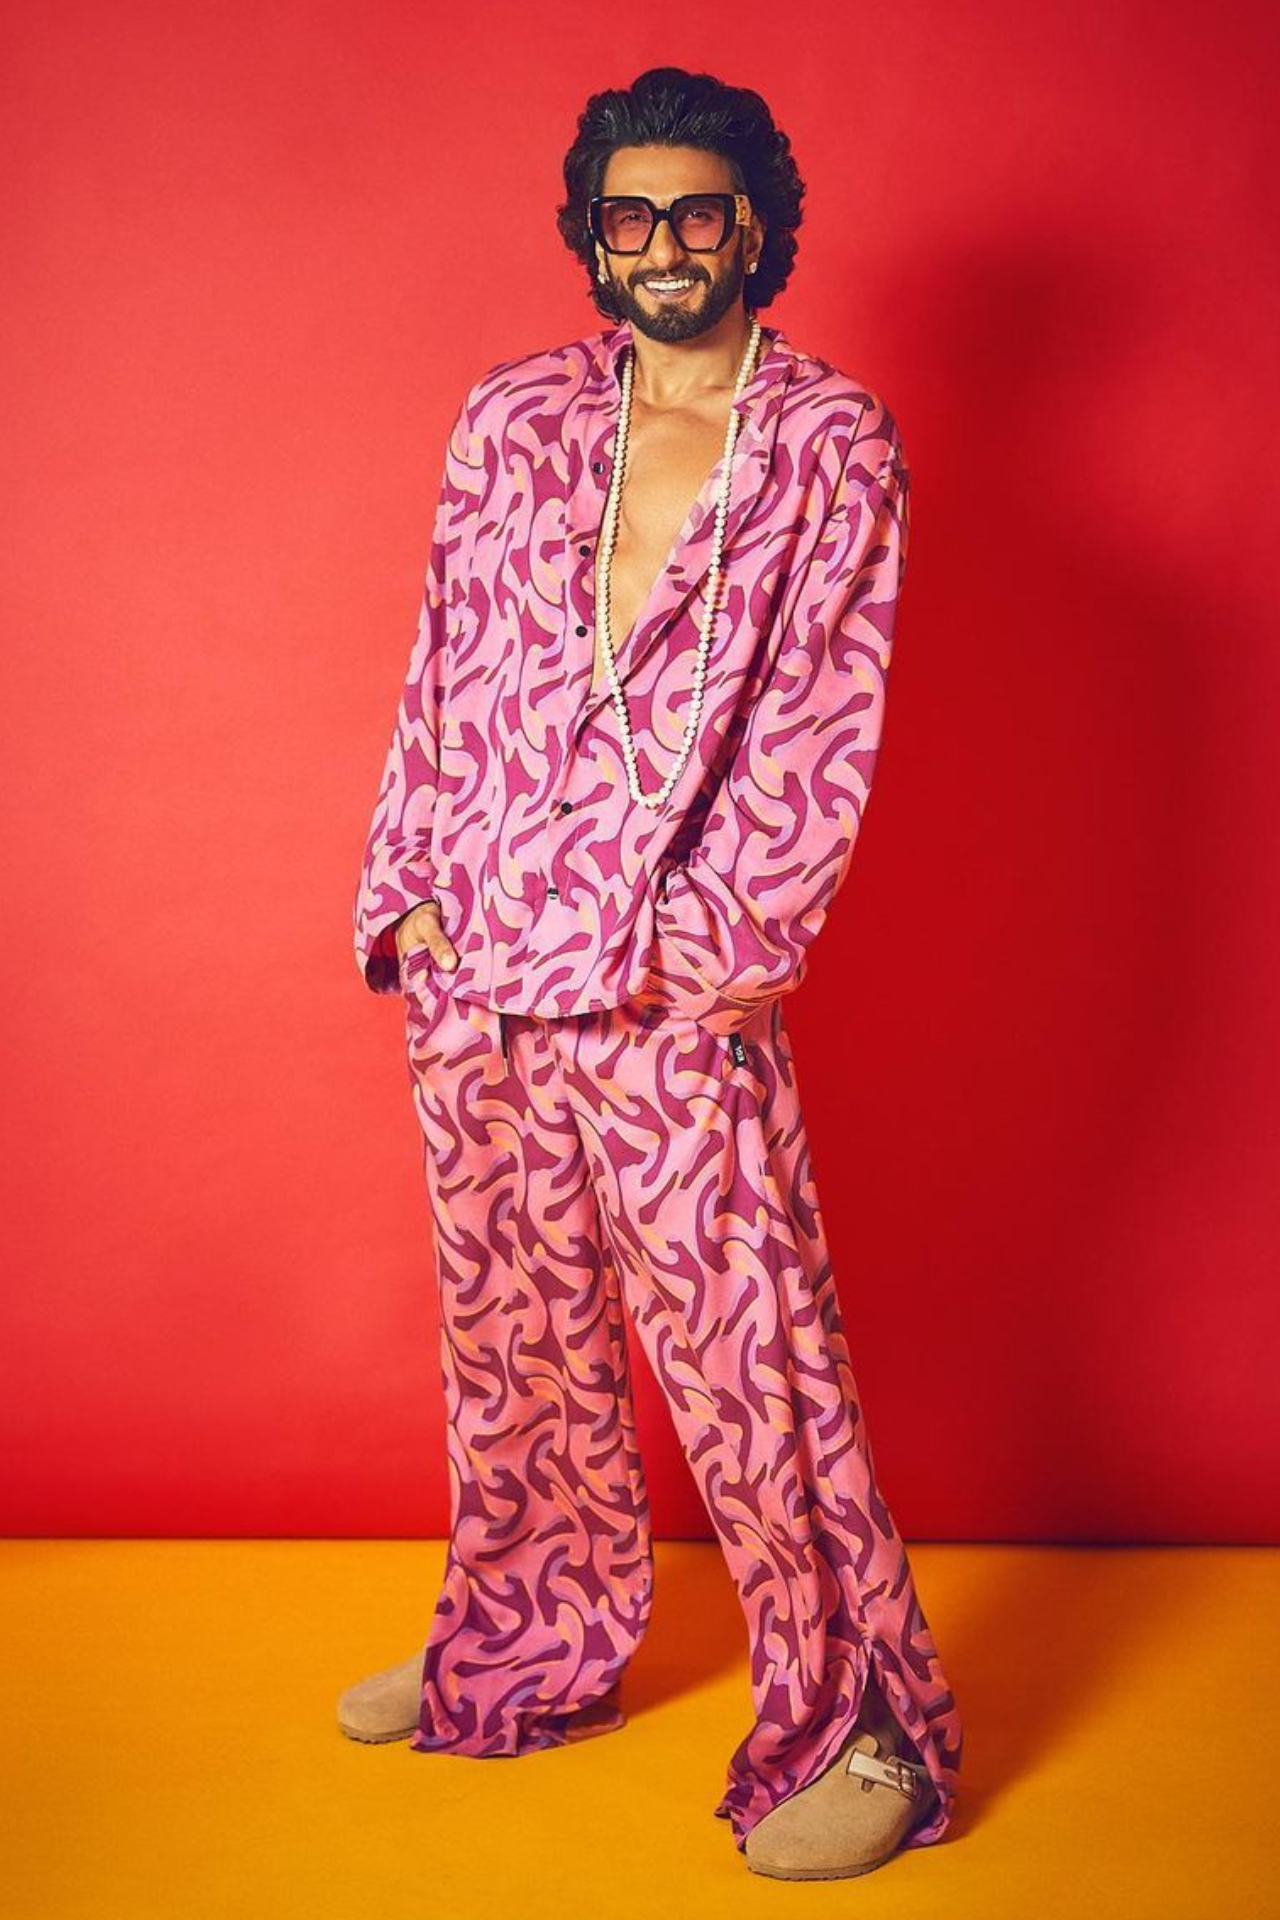 These Pictures Prove That Pink Is Ranveer Singh's Favourite Colour